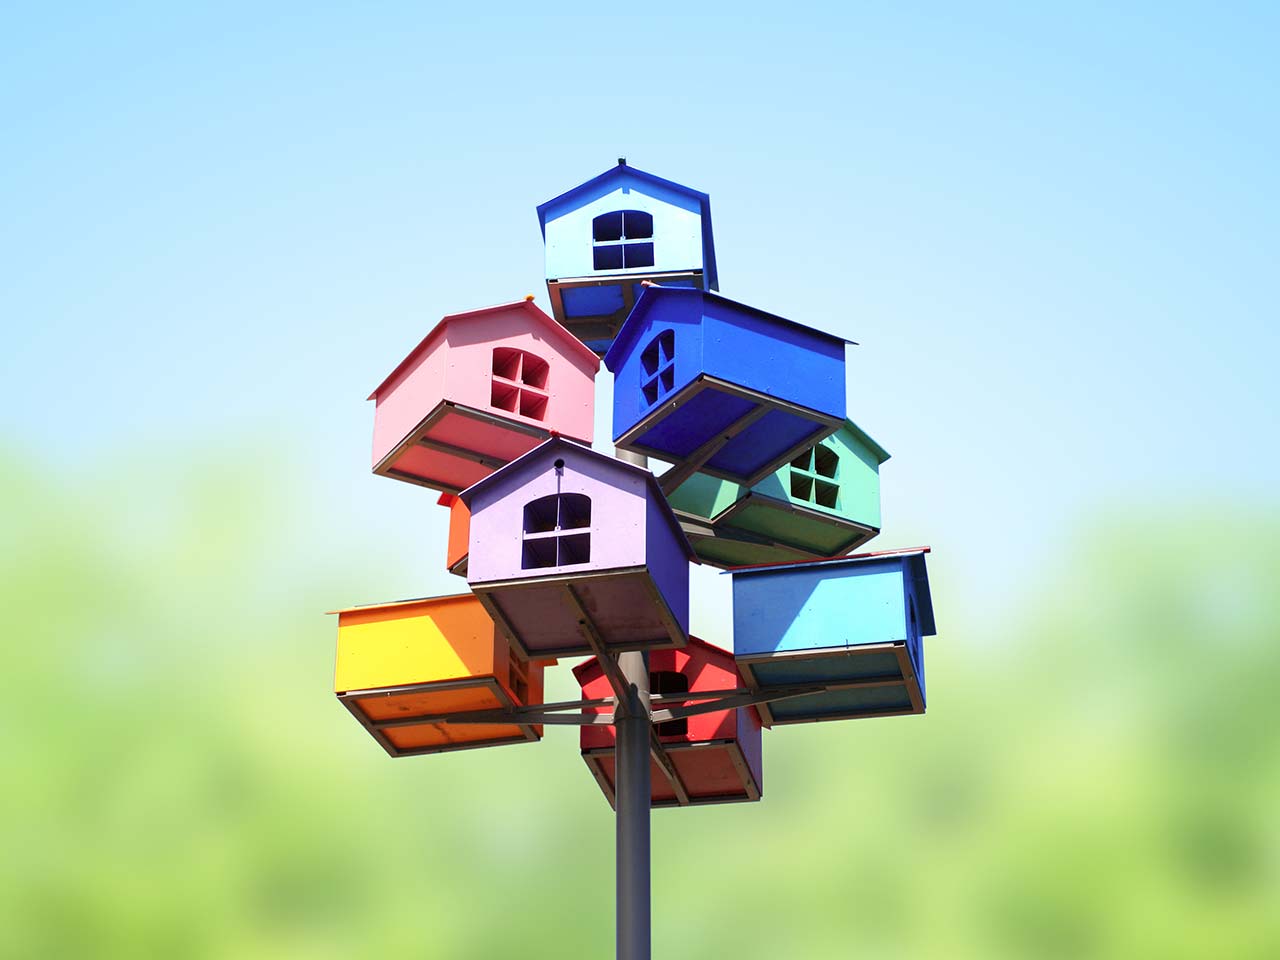 Colourful model houses as nesting boxes